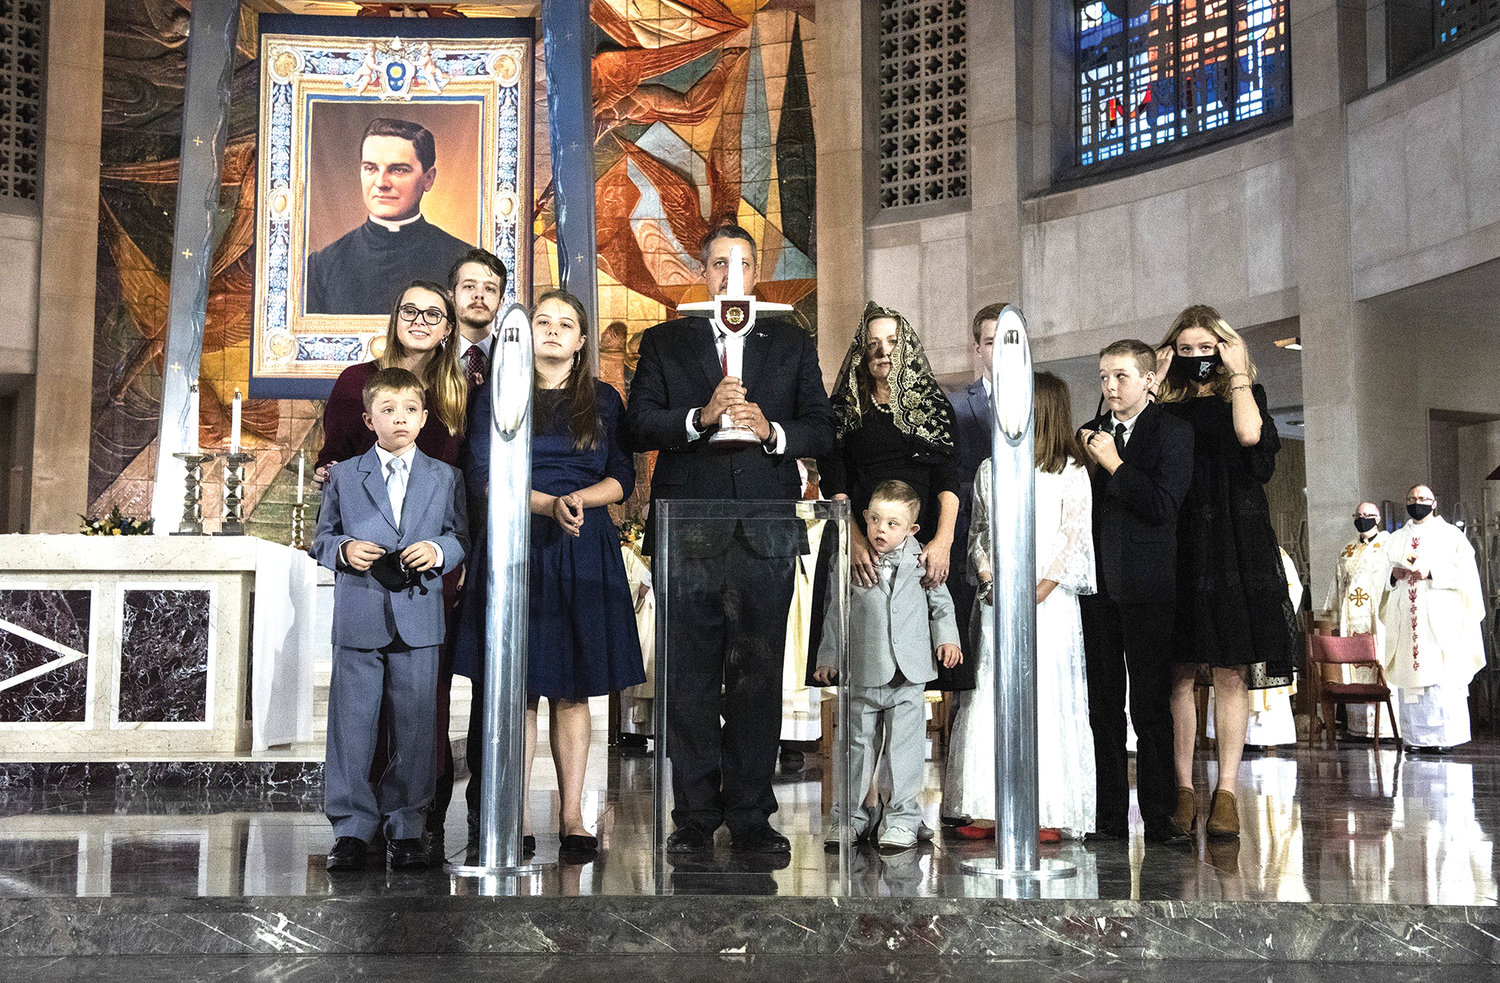 Michael “Mikey” McGivney Schachle, his parents, Daniel and Michelle, and several siblings stand with a relic during the Oct. 31 beatification Mass of Blessed Michael McGivney, founder of the Knights of Columbus, at St. Joseph’s Cathedral in Hartford, Conn. Daniel Schachle is holding a cross containing the McGivney relic.